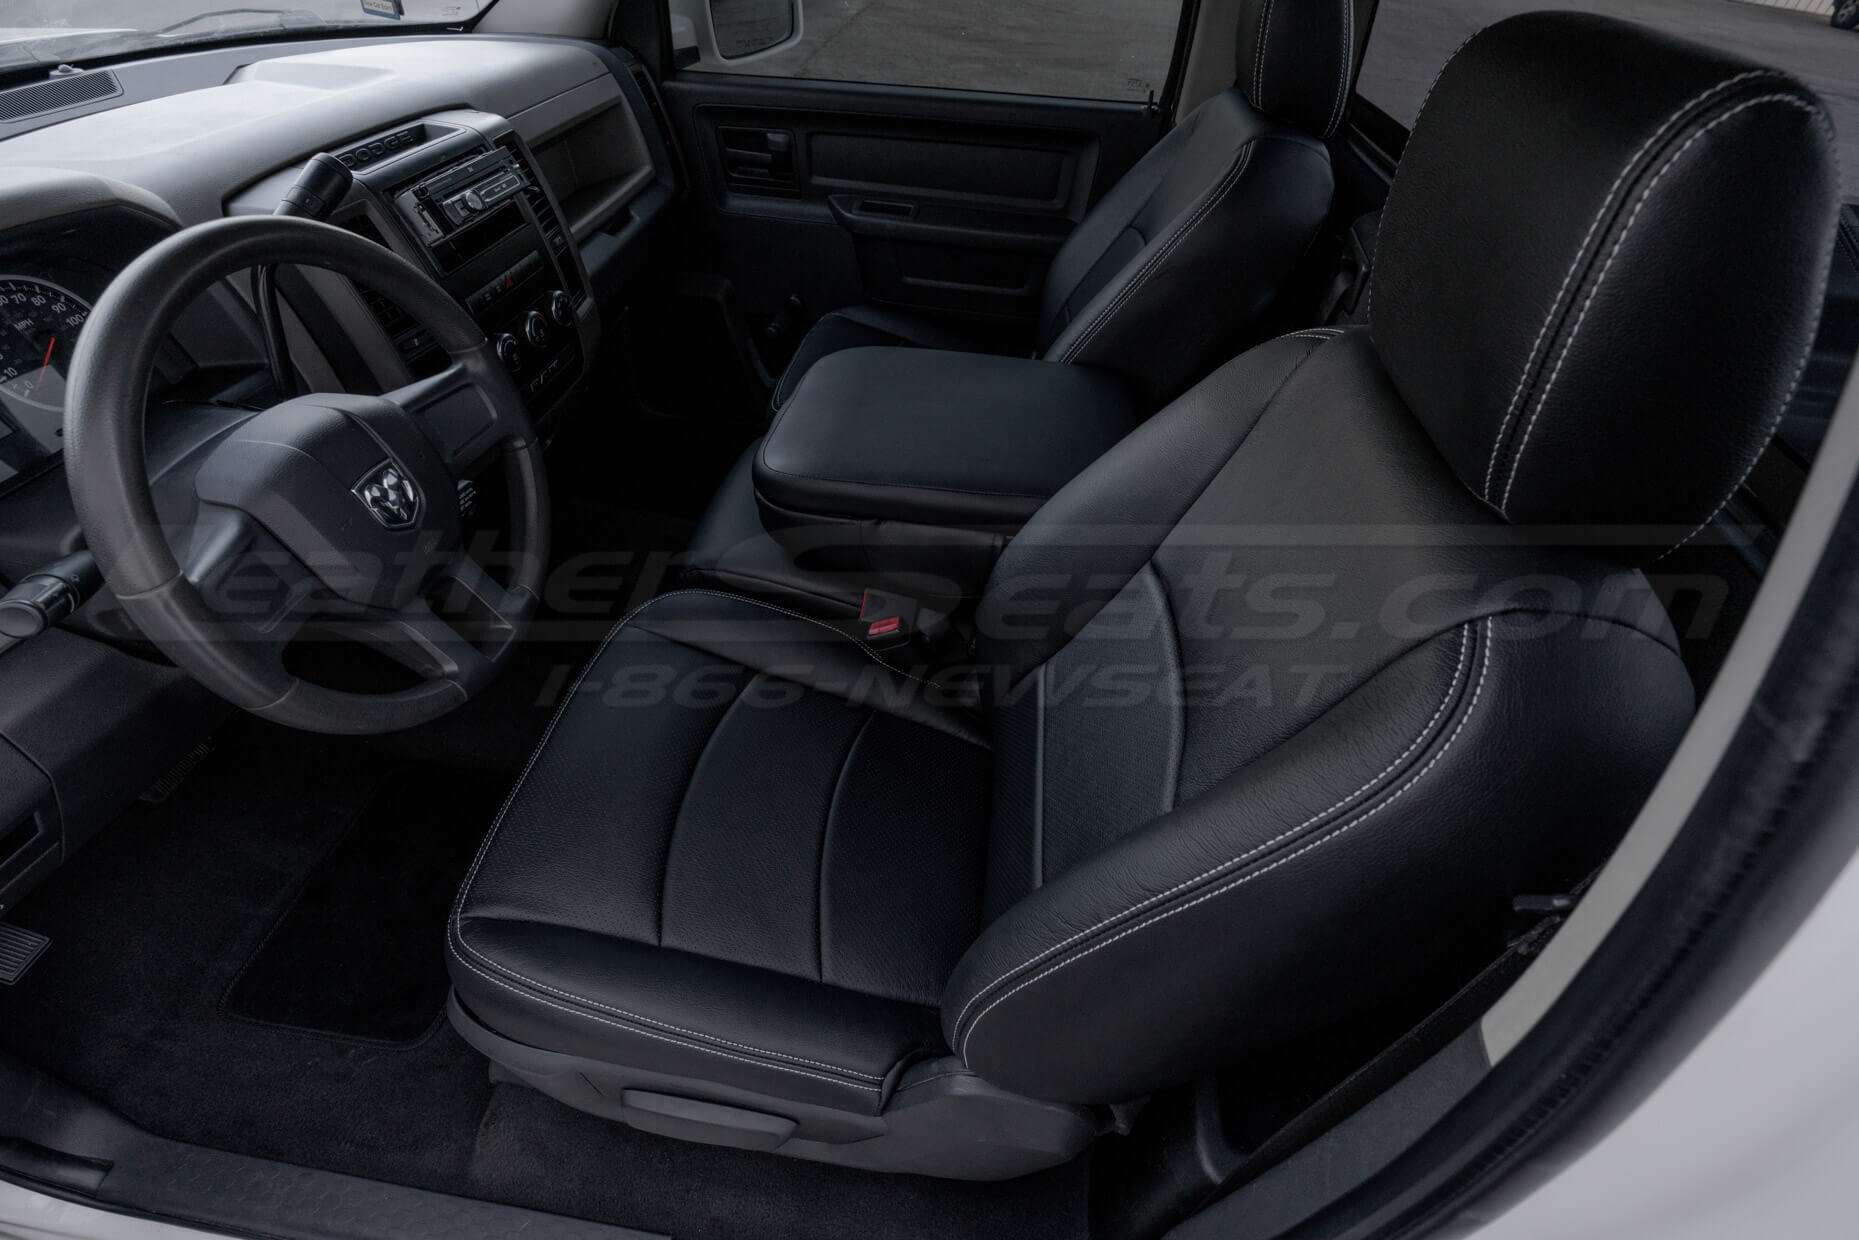 Installed leather seats for Dodge Ram - Black - Top down of front driver seat